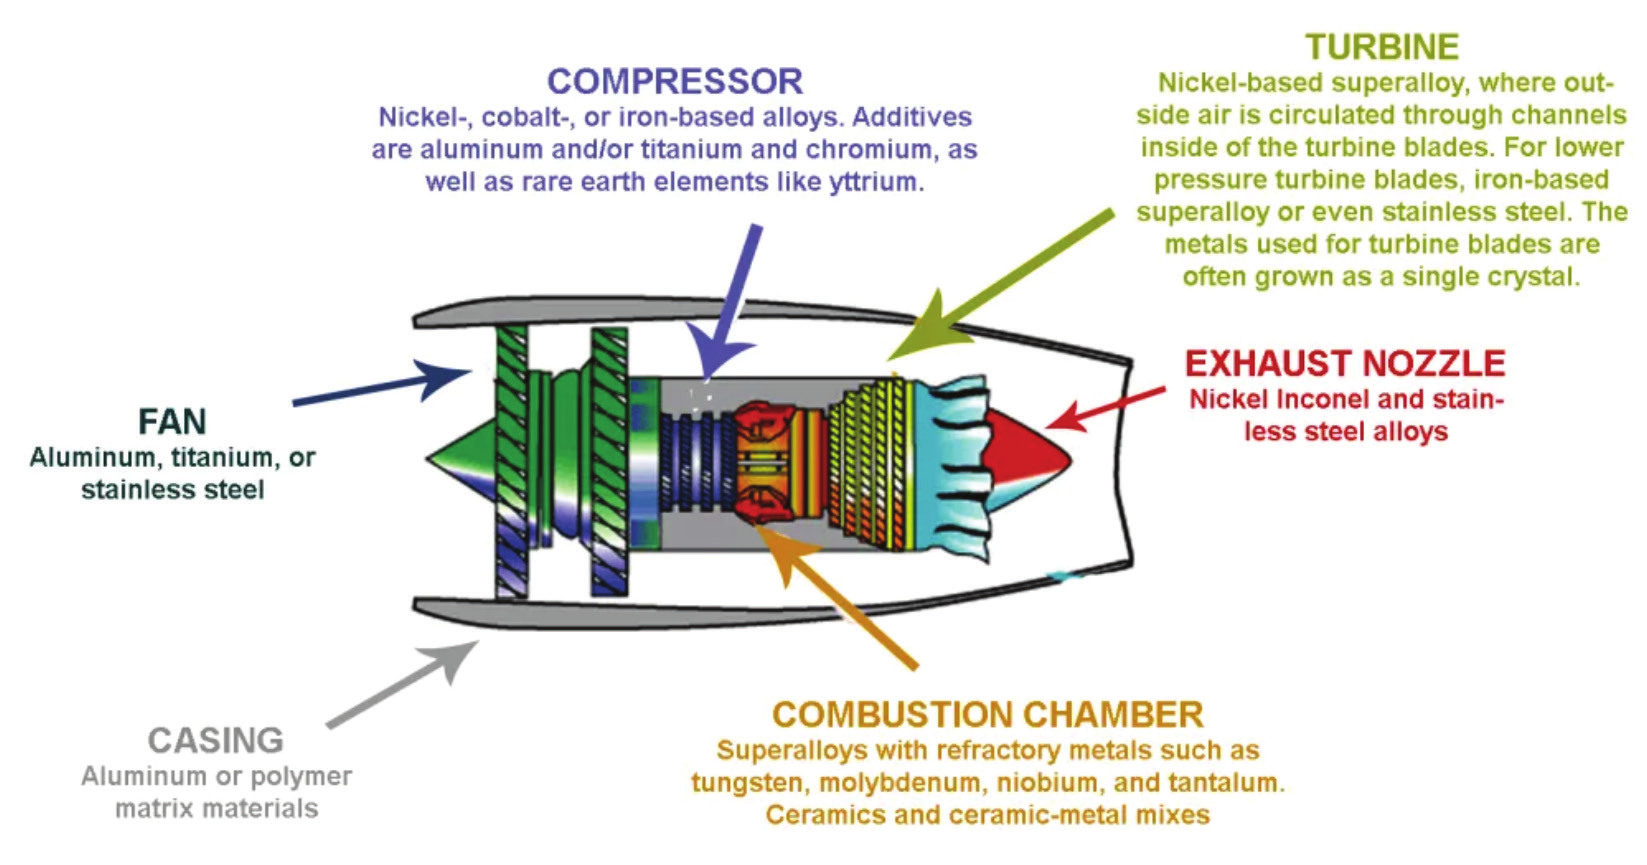 Typical materials used in aero engine